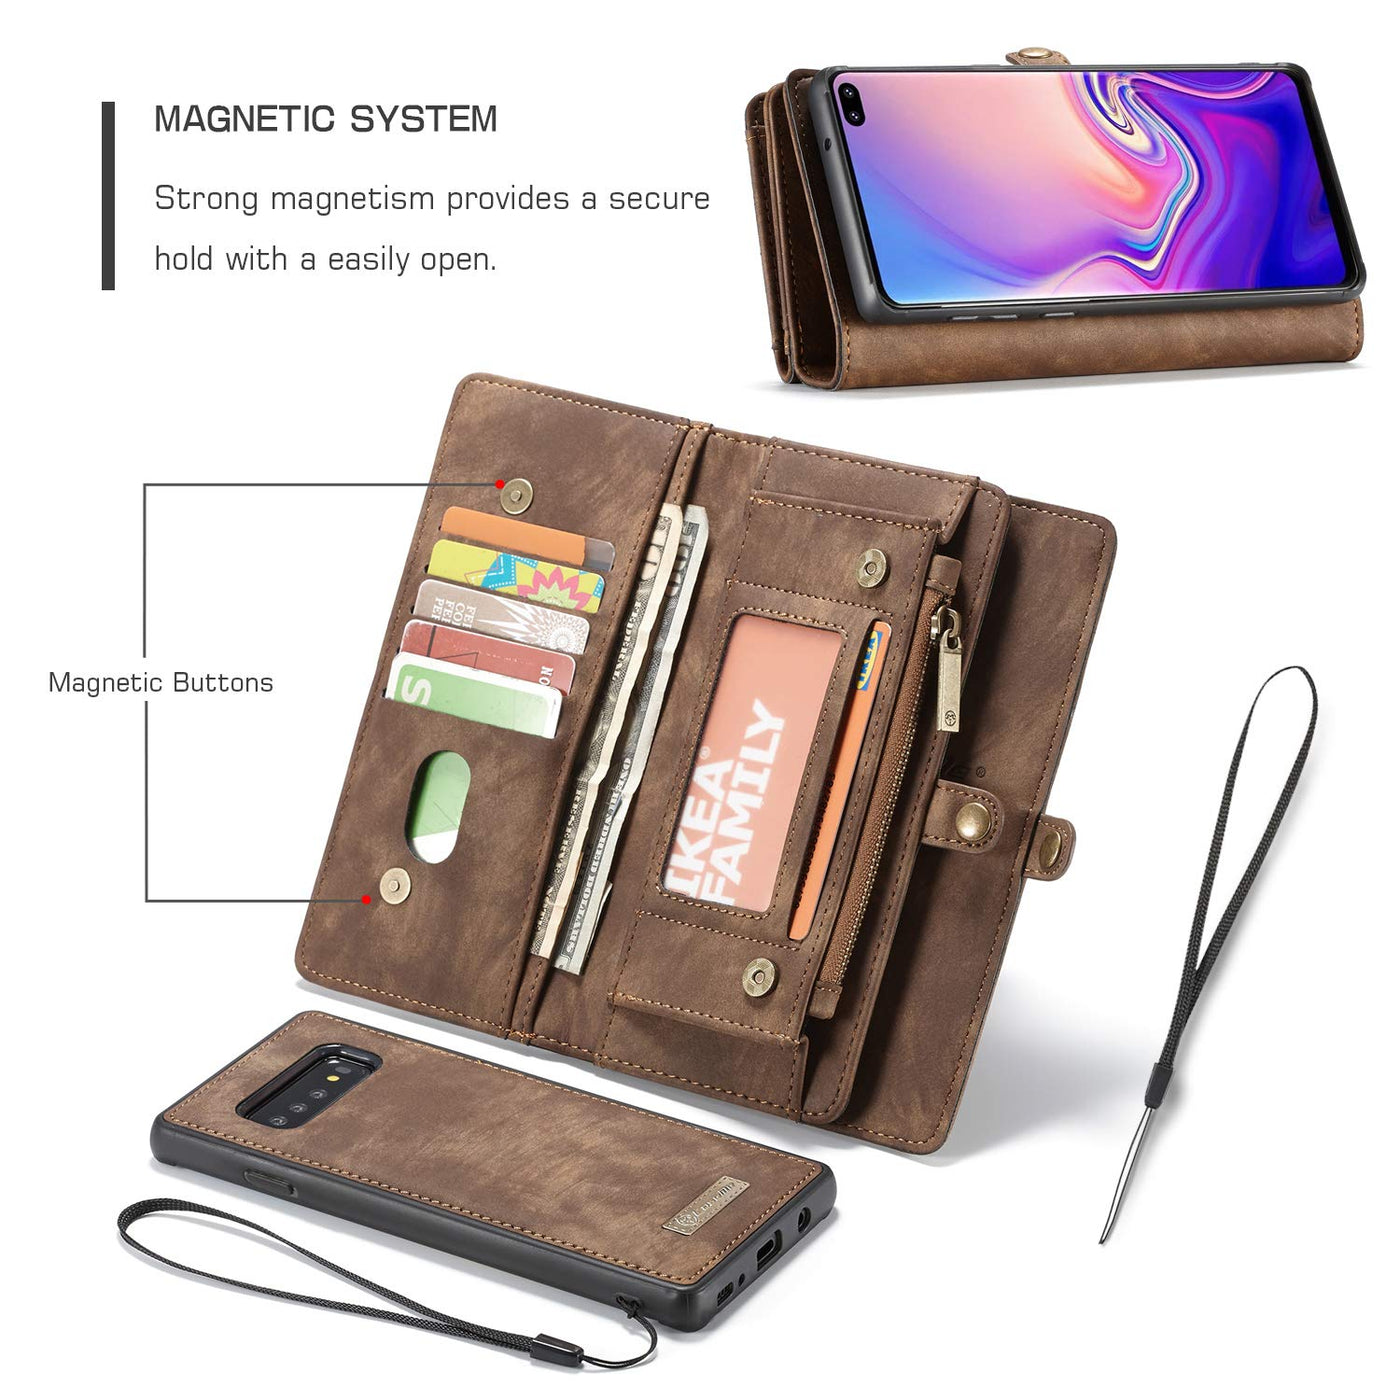 Samsung Galaxy S10 Plus Magnetic flip Wallet cover